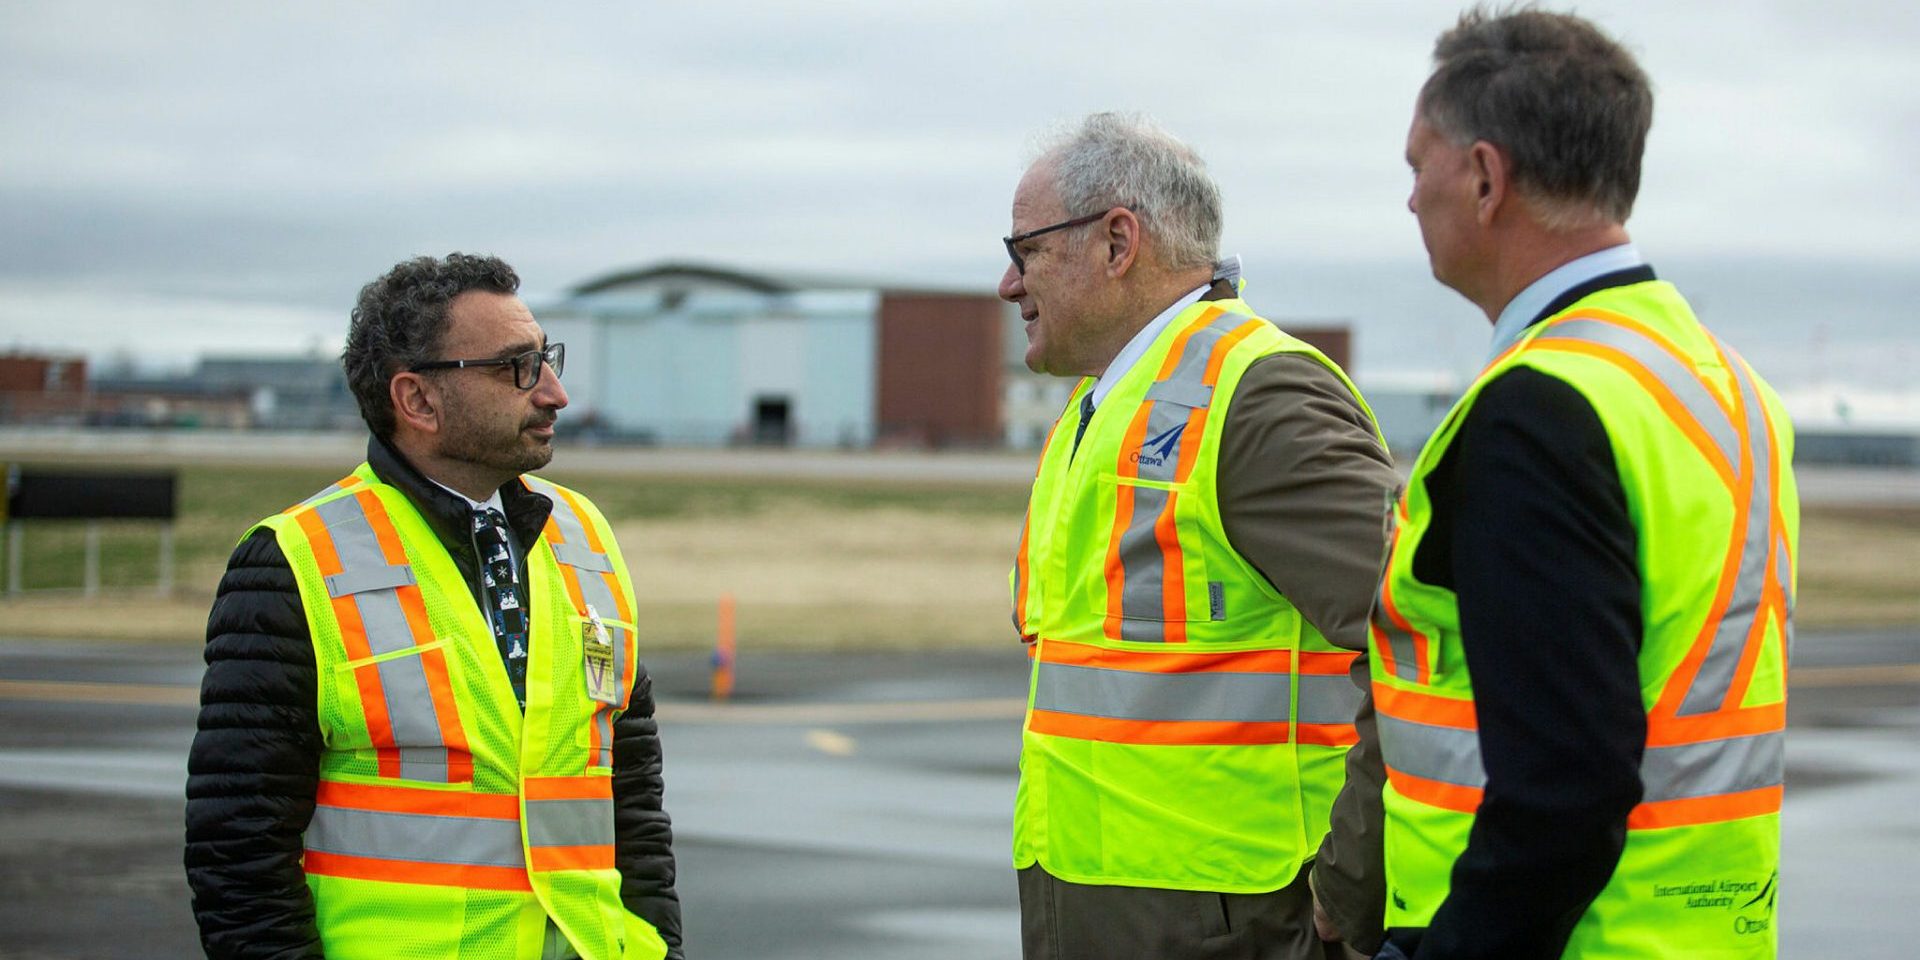 Transport Minister Omar Alghabra, left, makes an announcement with Liberal MP David McGuinty, right, and Mark Laroche, Ottawa Airport Authority president and CEO, at the Ottawa Macdonald-Cartier International Airport on Nov. 28, 2022. The Hill Times photograph by Andrew Meade